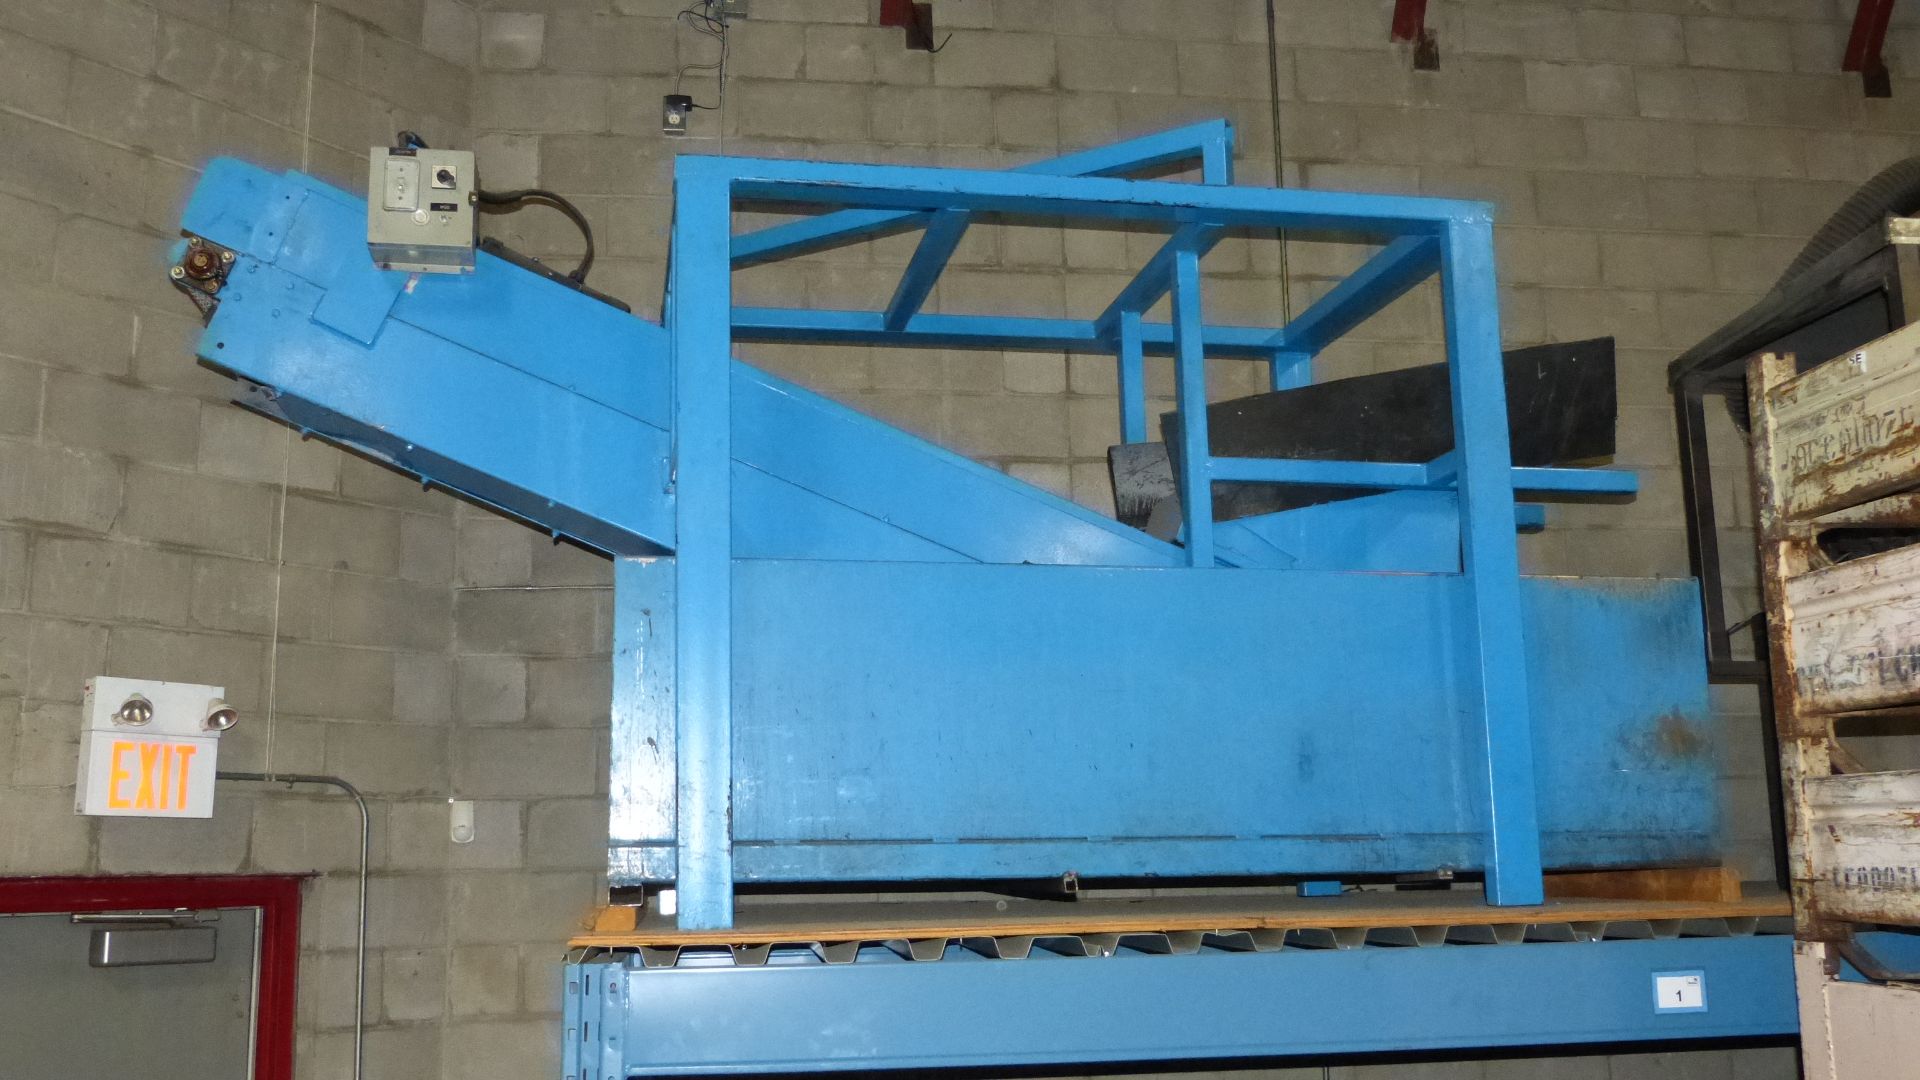 Uniflo Inclined Belt Conveyor, Cleated Belt, Chain Driven - Image 5 of 5